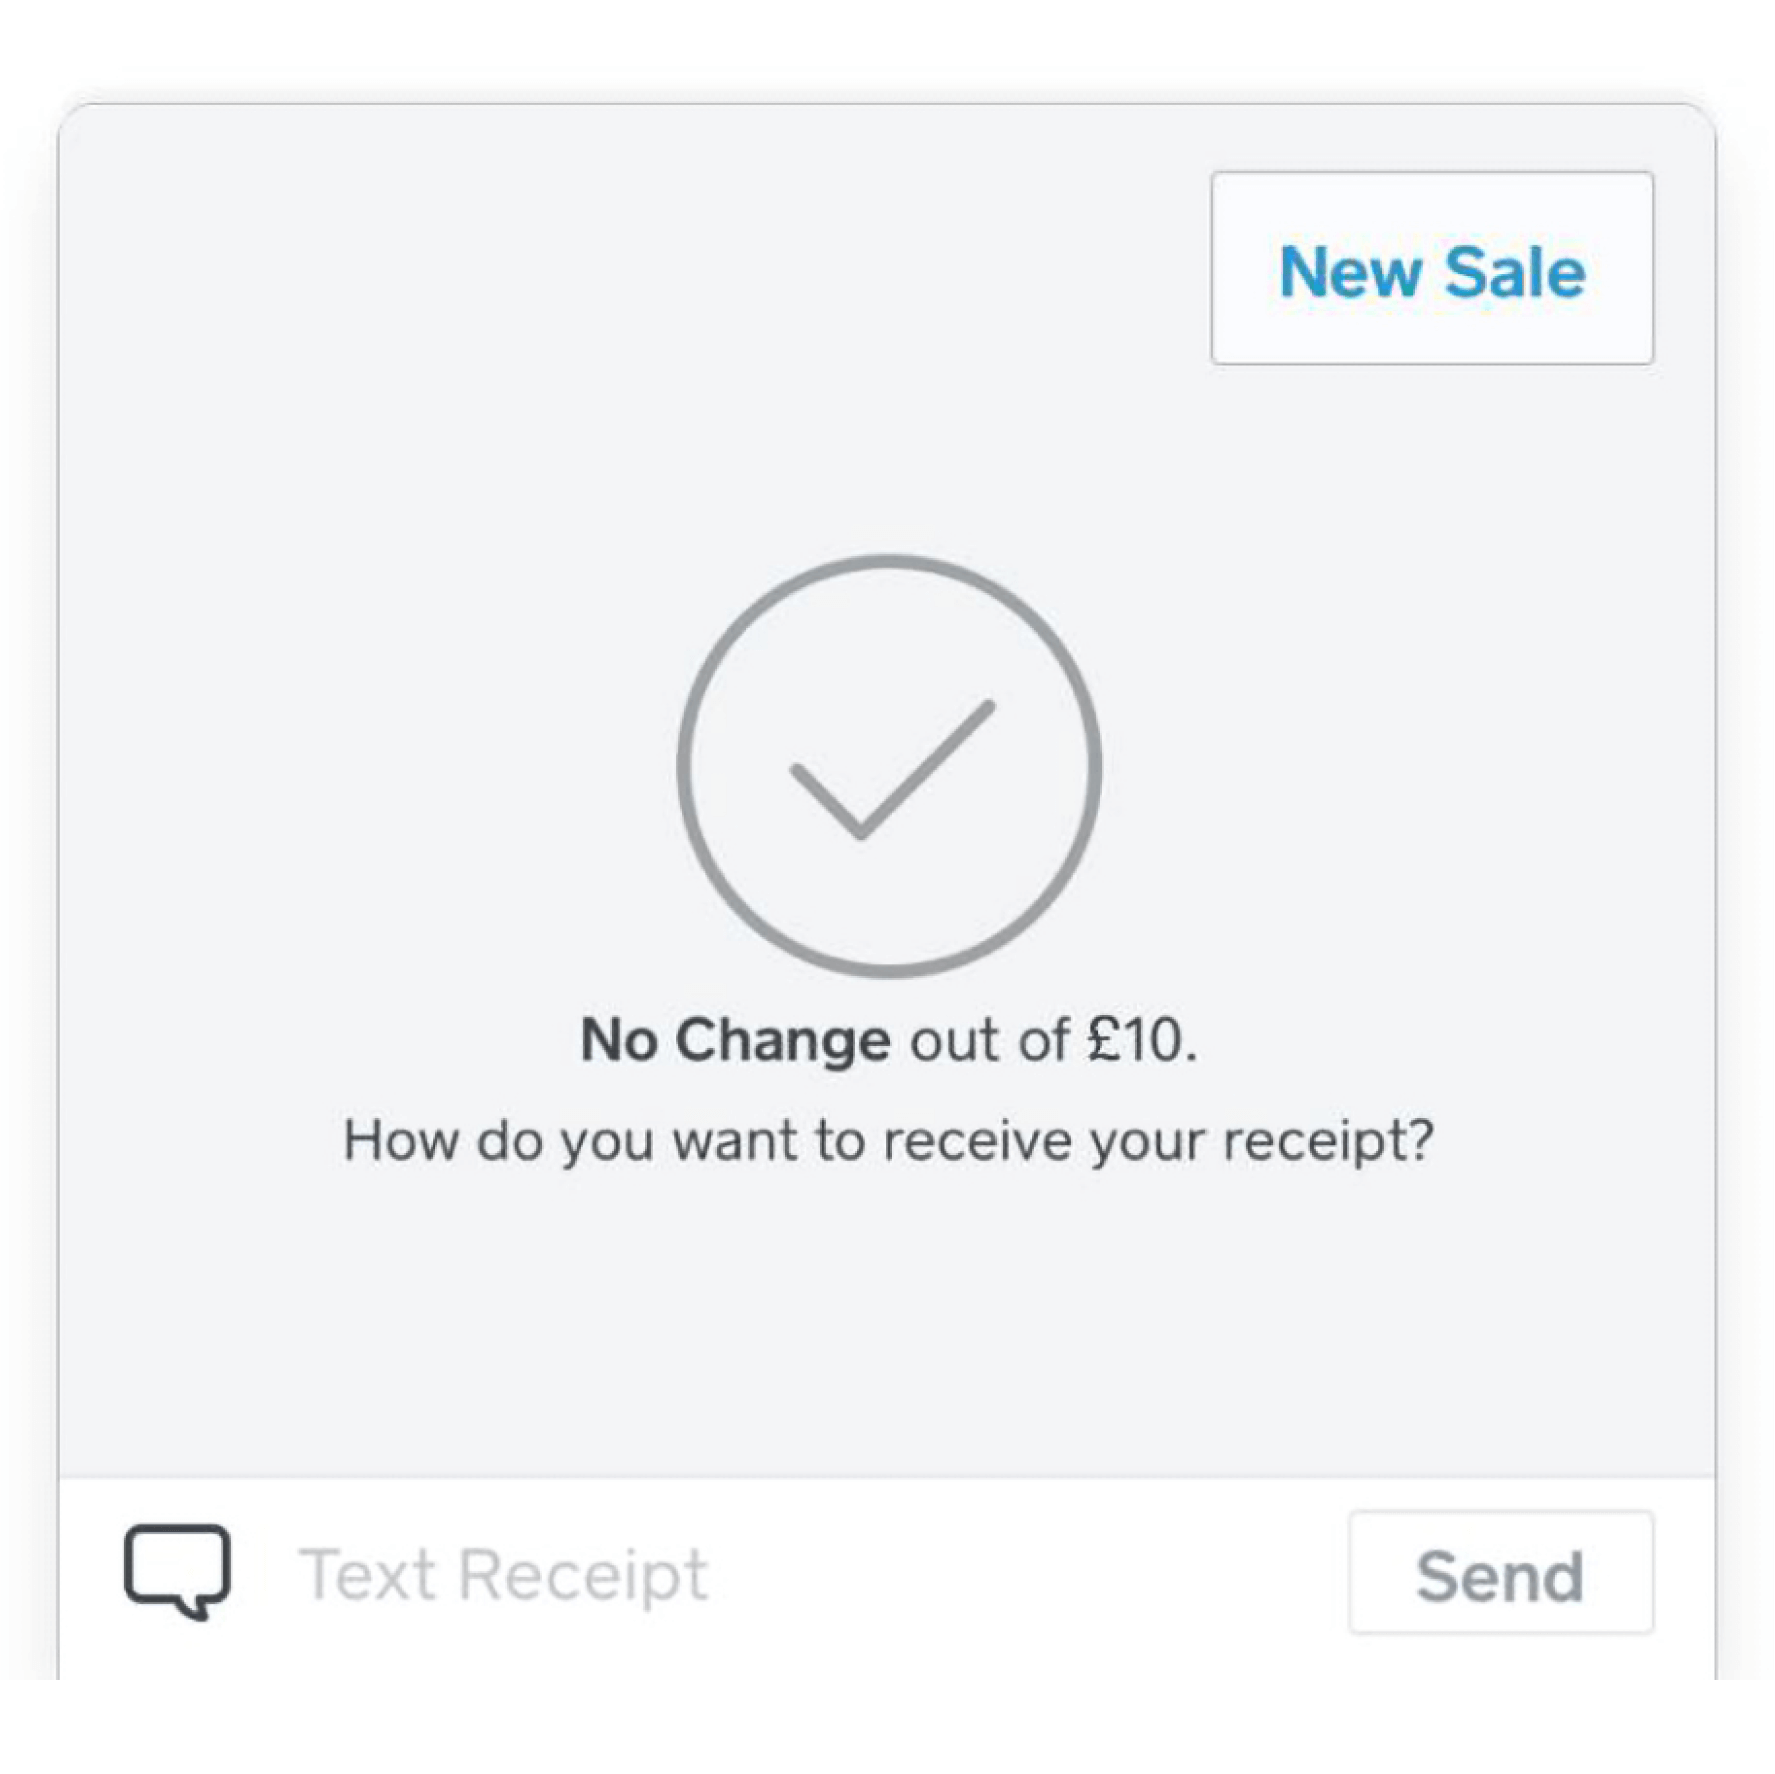 A sales notification asking "How do you want to receive your receipt?"